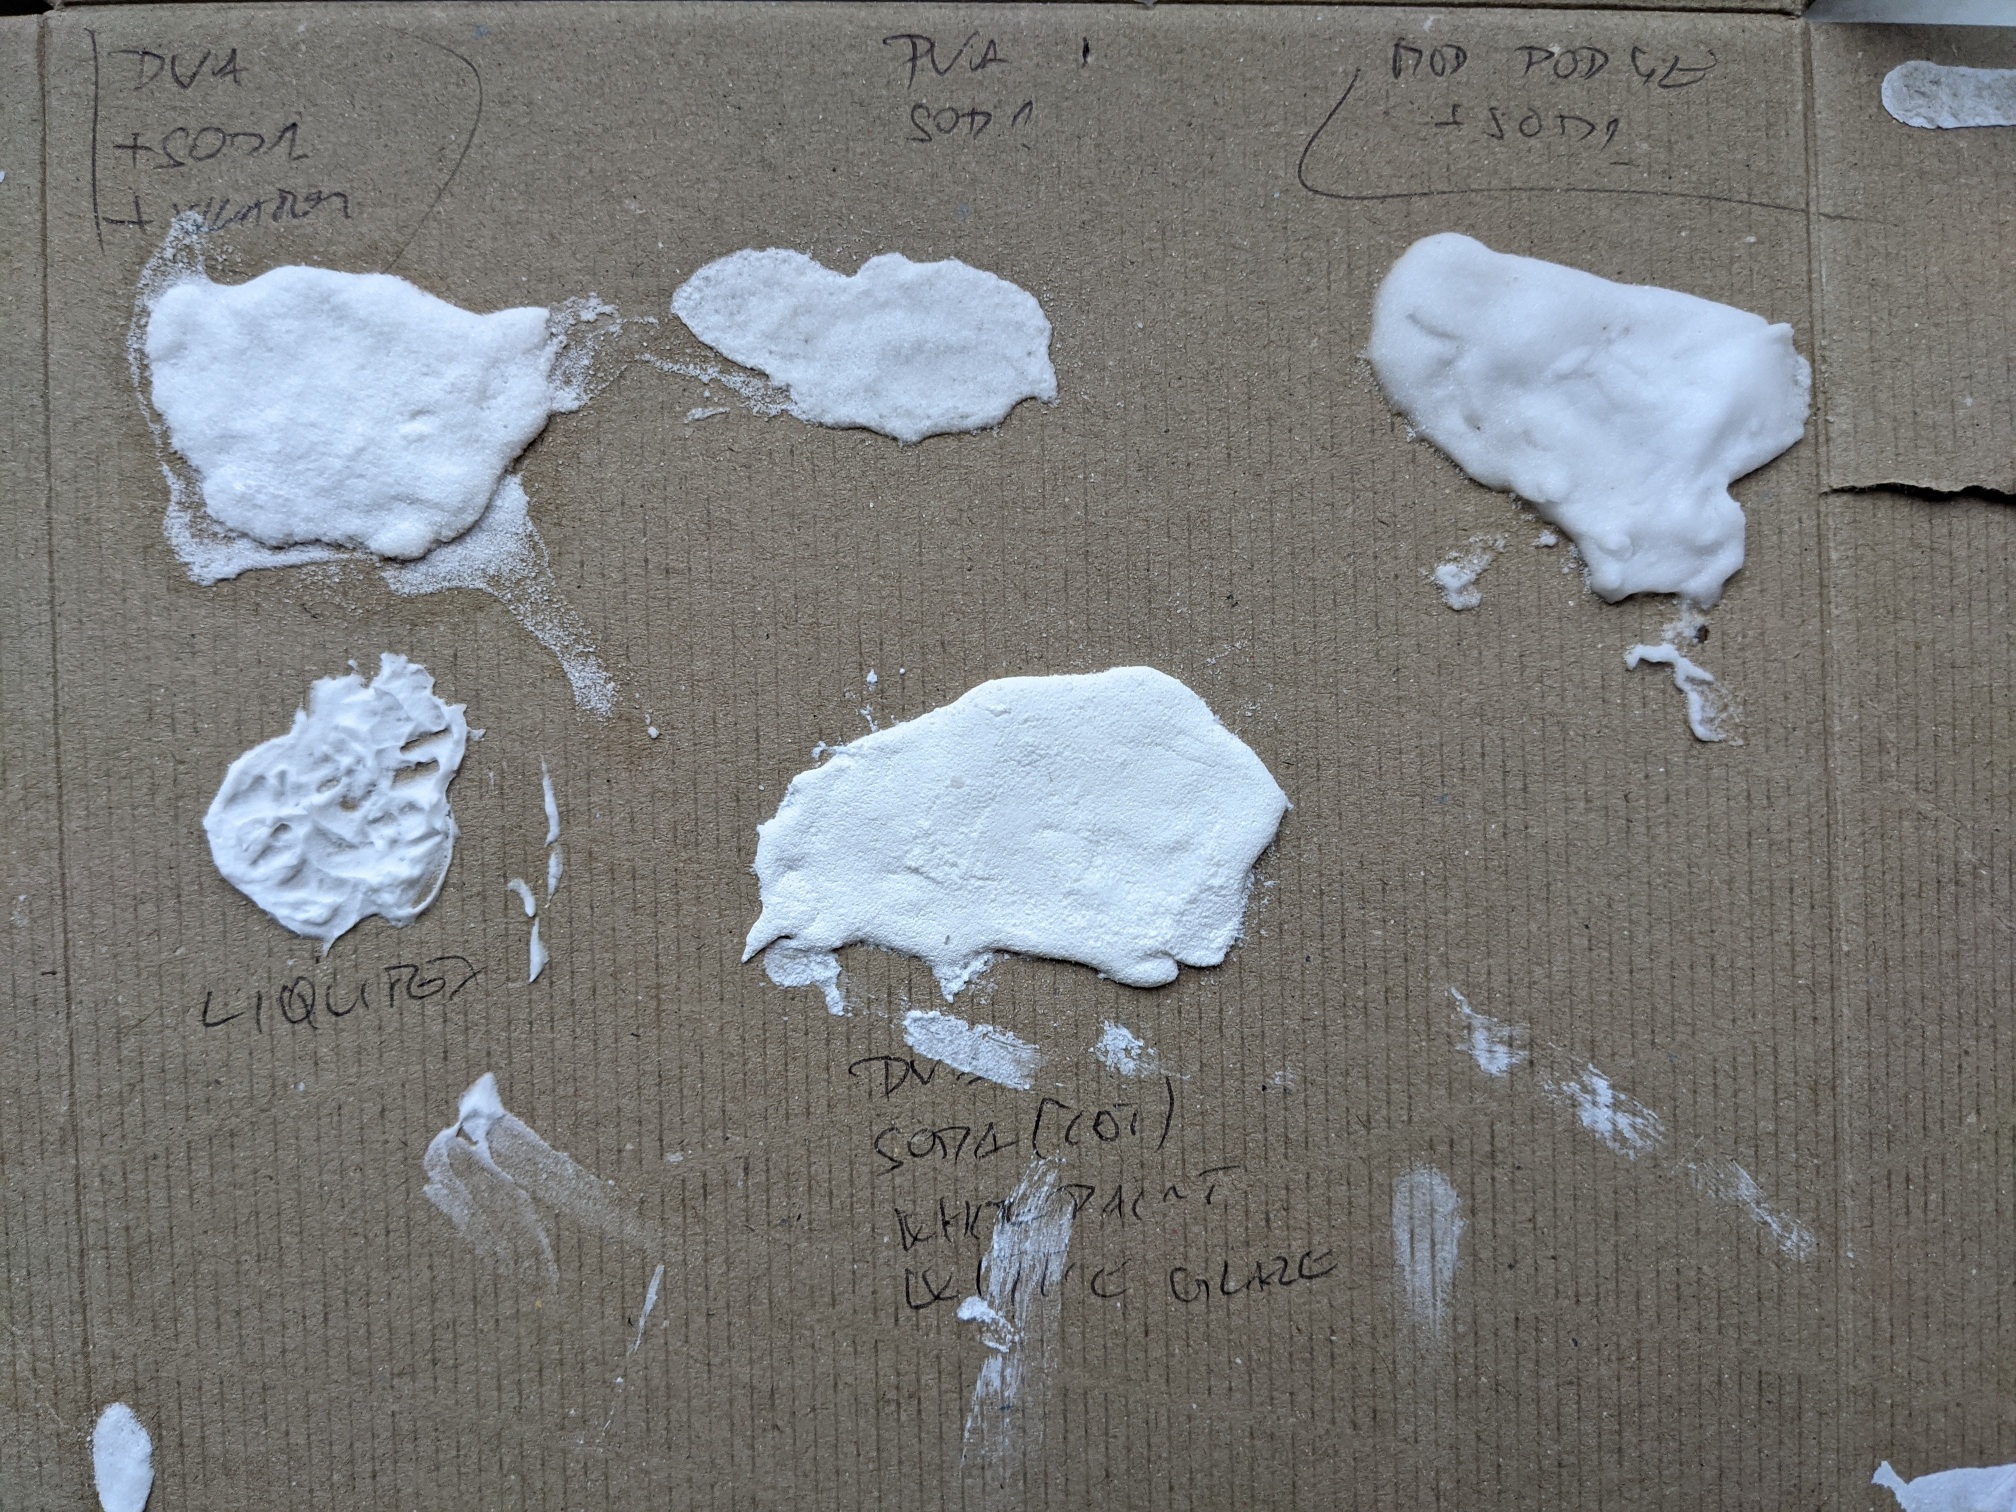 Testing snow. Different mixes of PVA glue, baking soda, Mod Podge and white paint. One of the samples is just a bit of Liquitex paste. Eventually, I chose Mod Podge with baking soda. I did the test a few days sooner and left it on the window to see if there is going to be any yellowing.